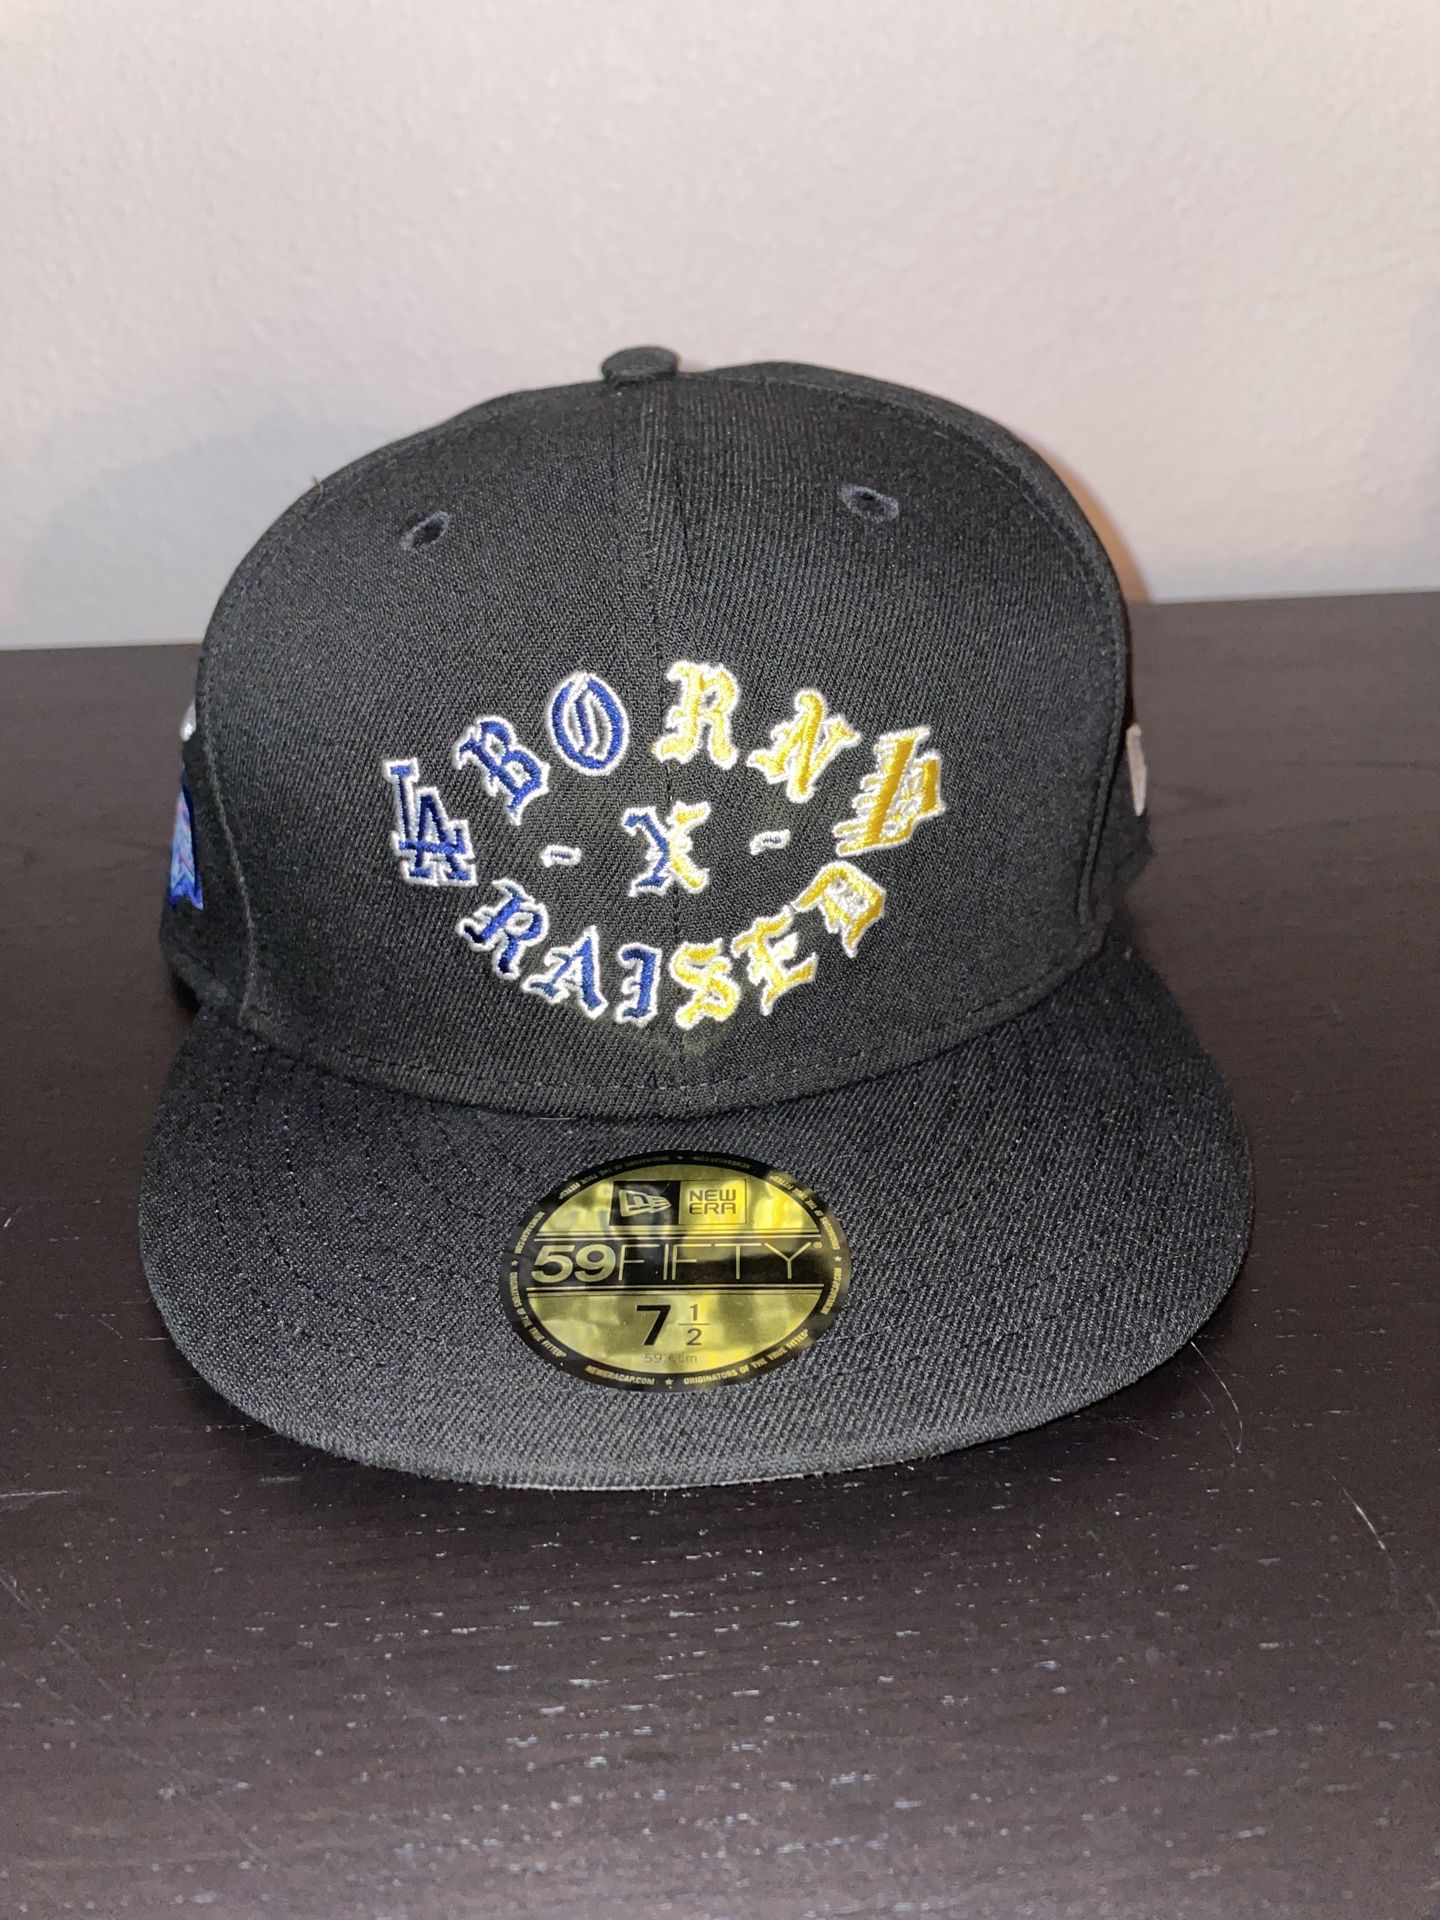 lakers championship fitted hat